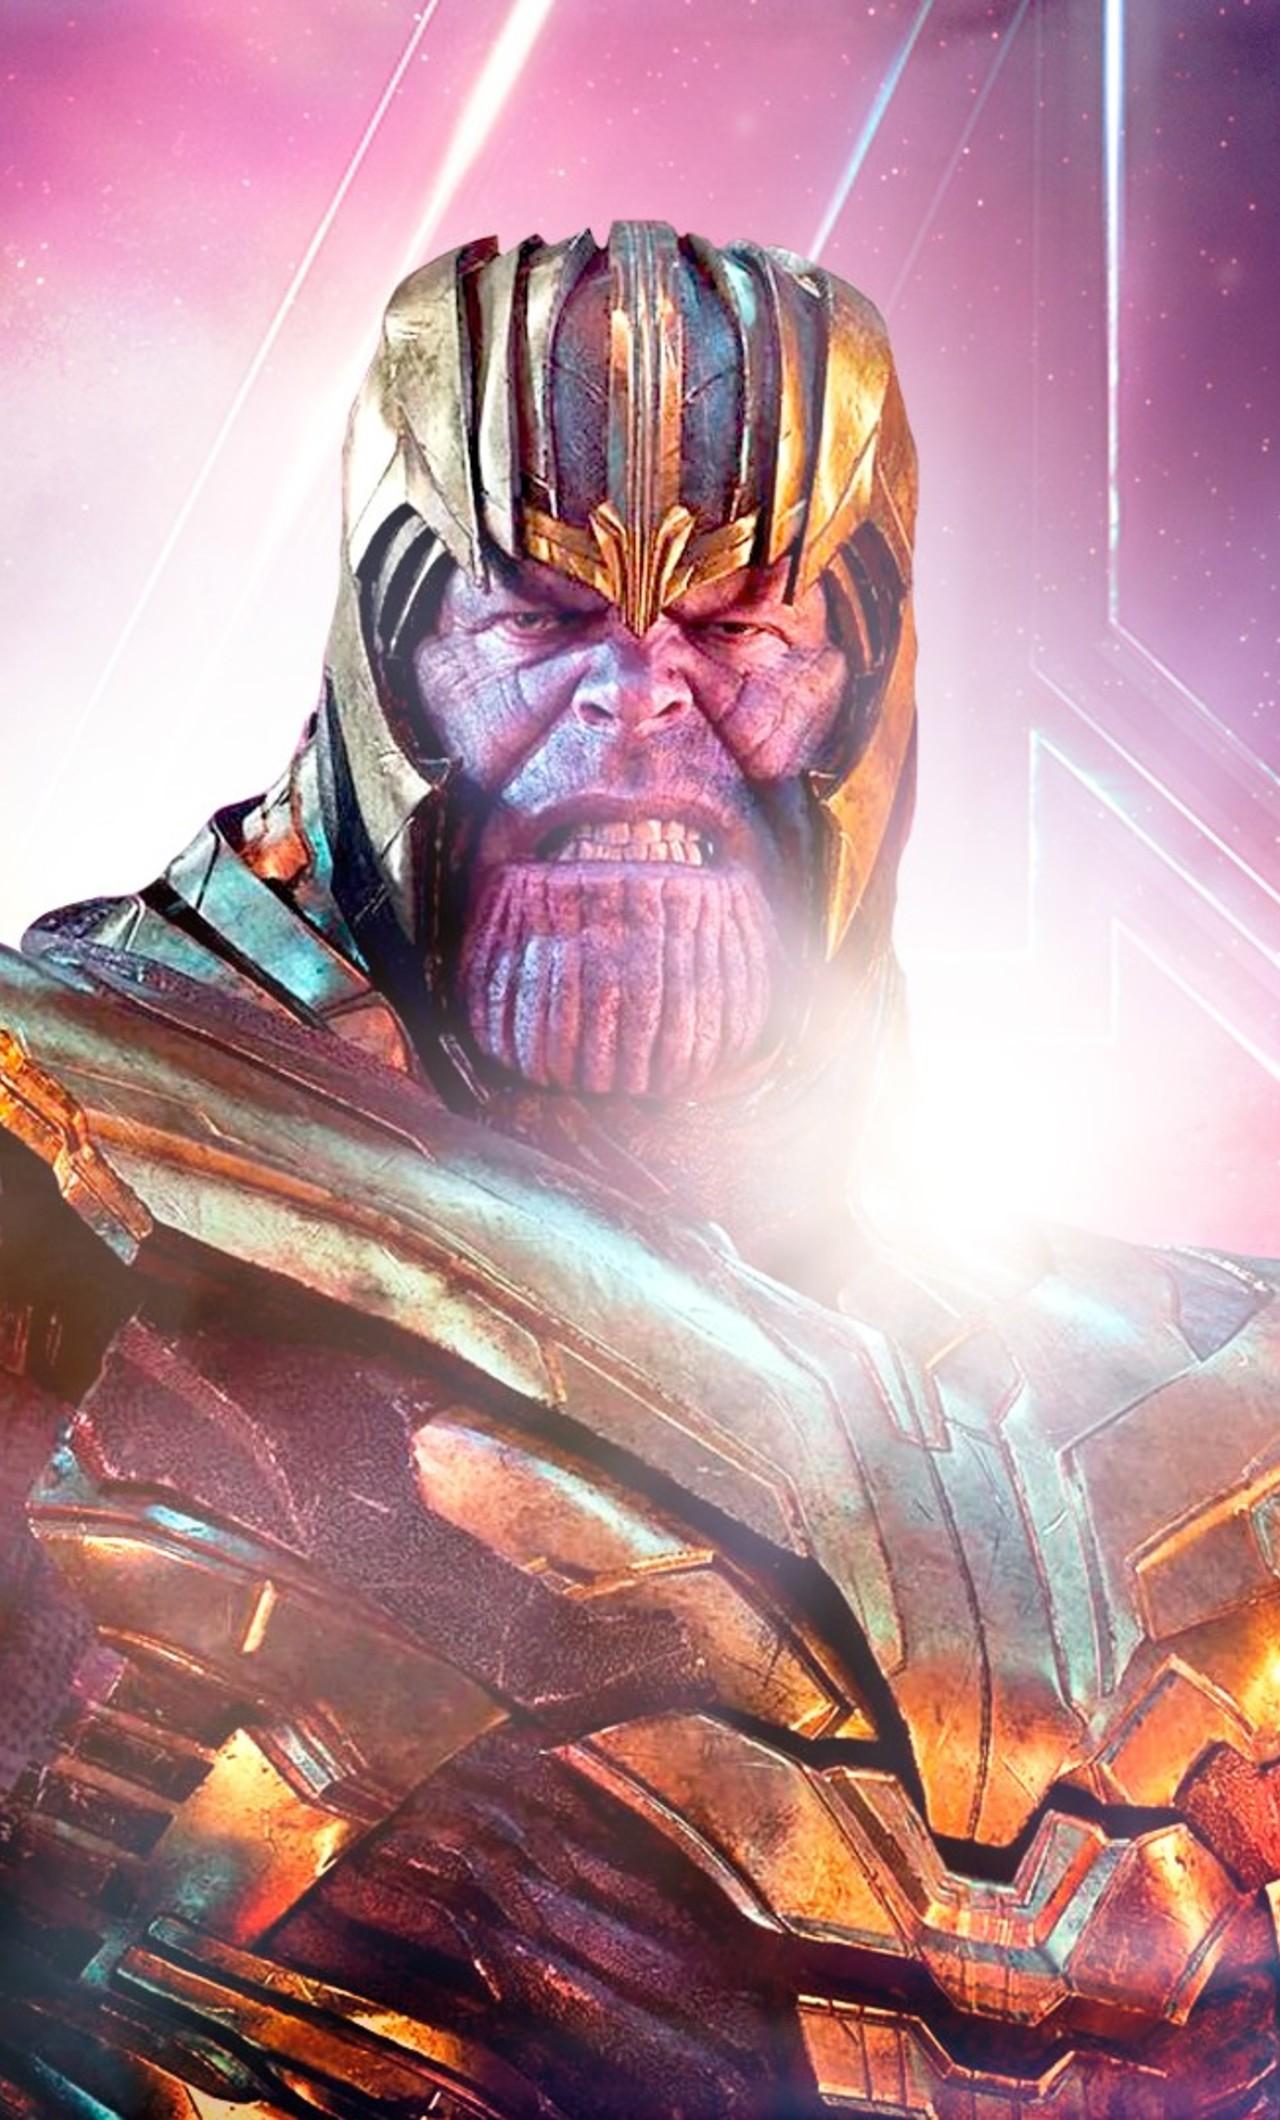 instal the last version for iphoneAvengers: Endgame